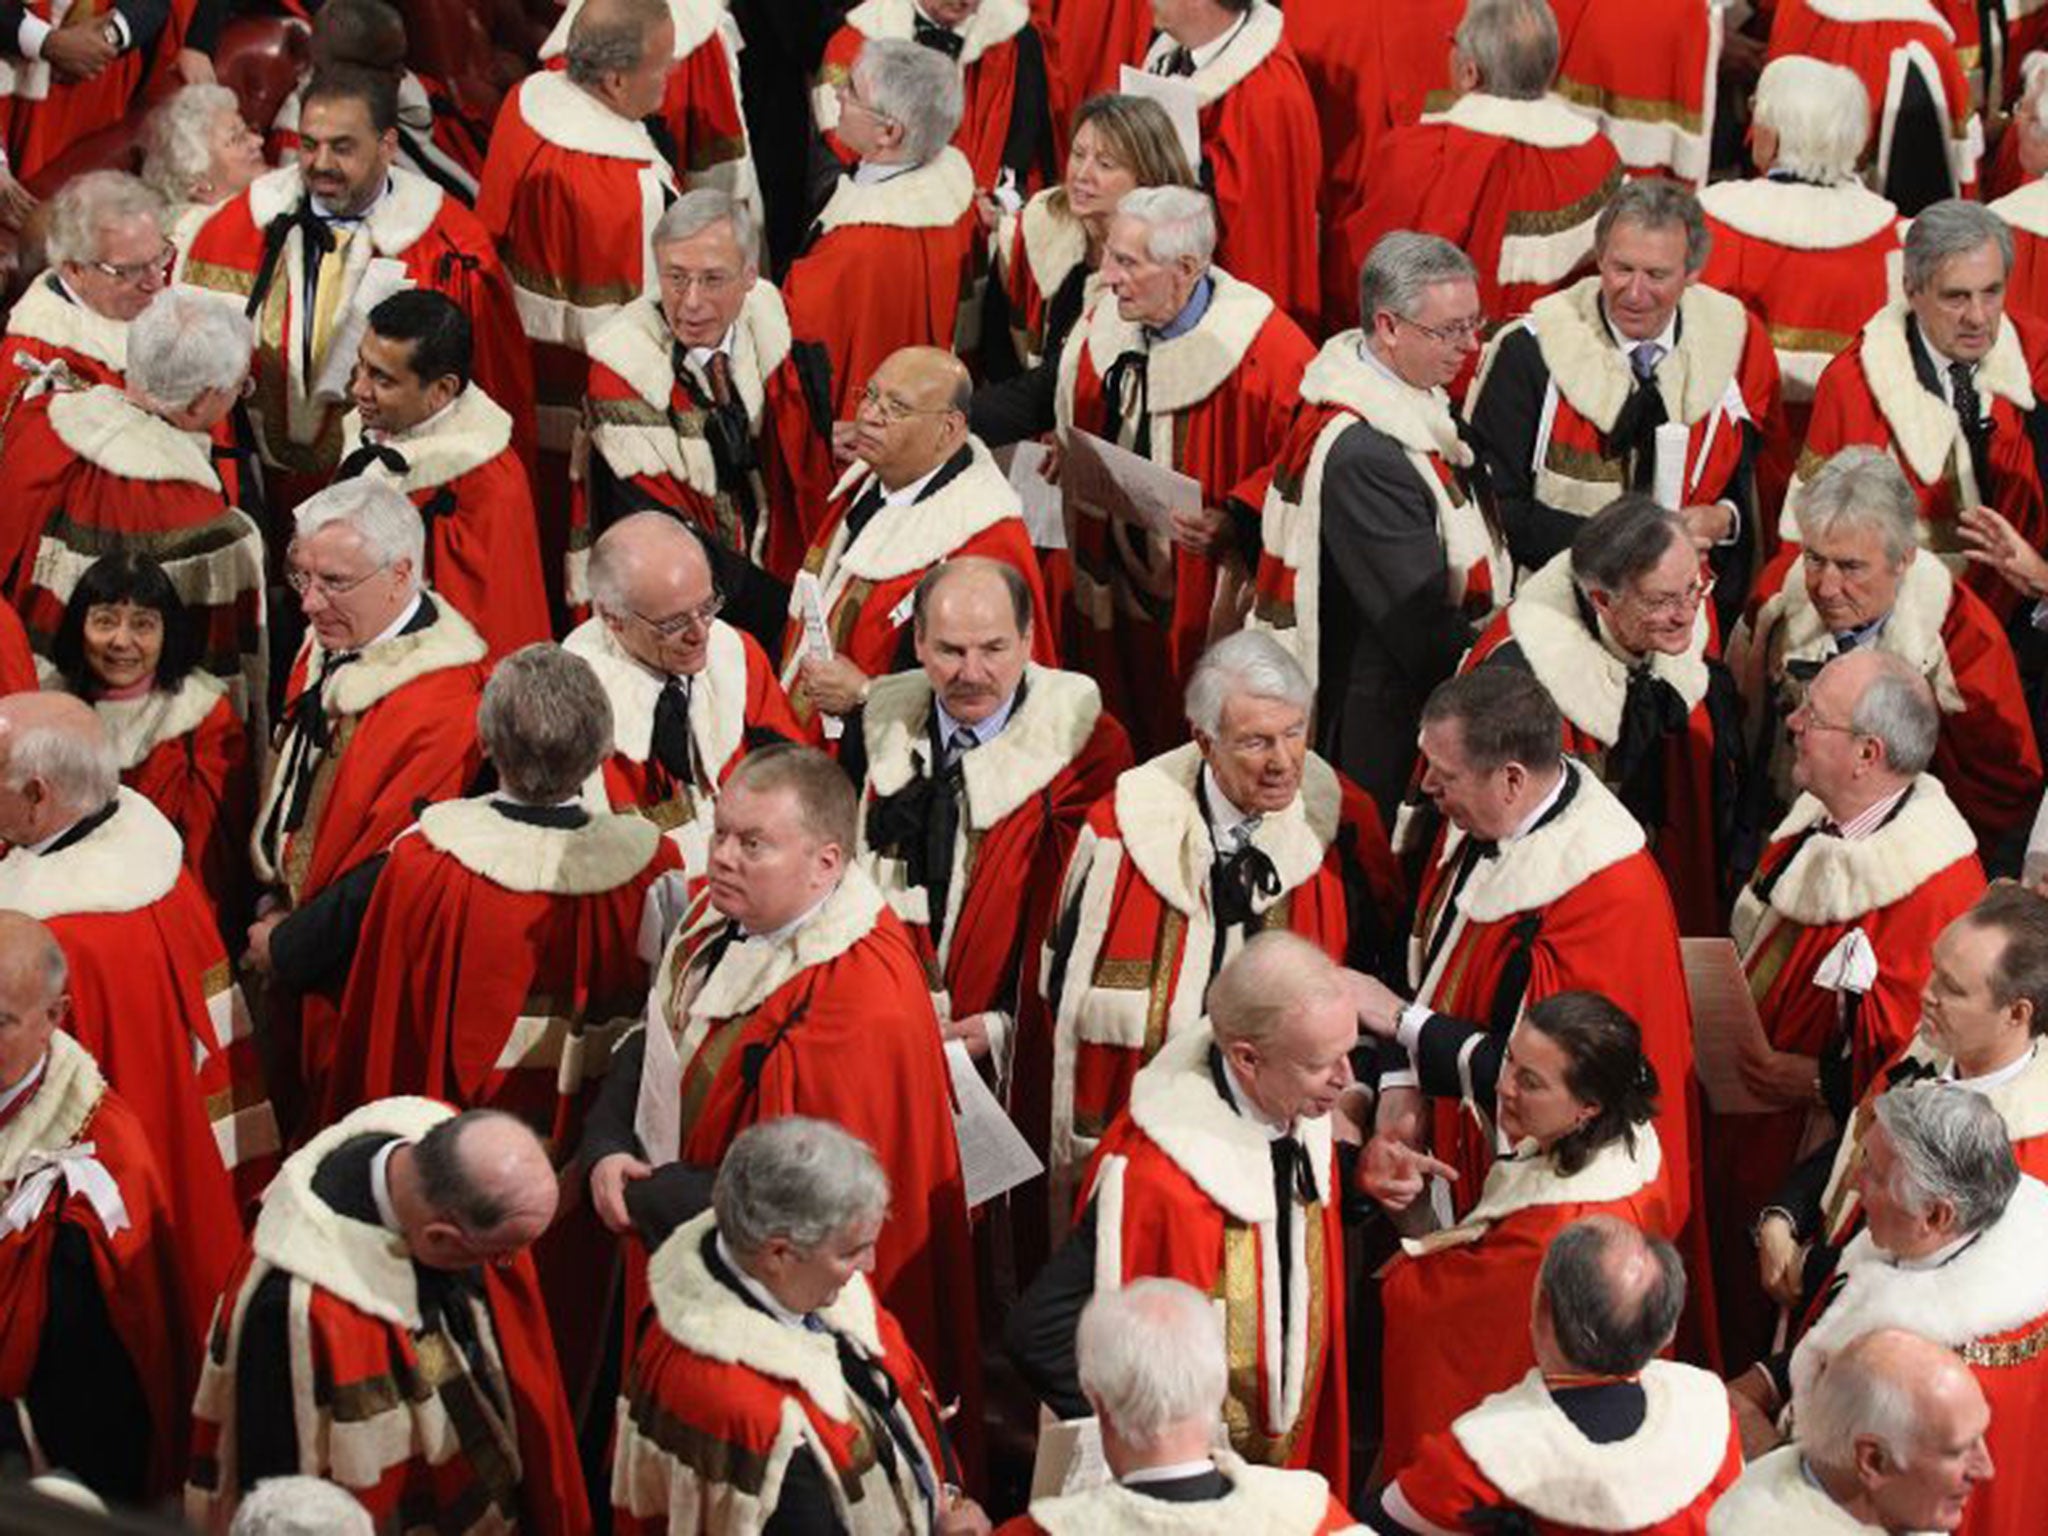 Peers leave the Lords after the state opening of Parliament